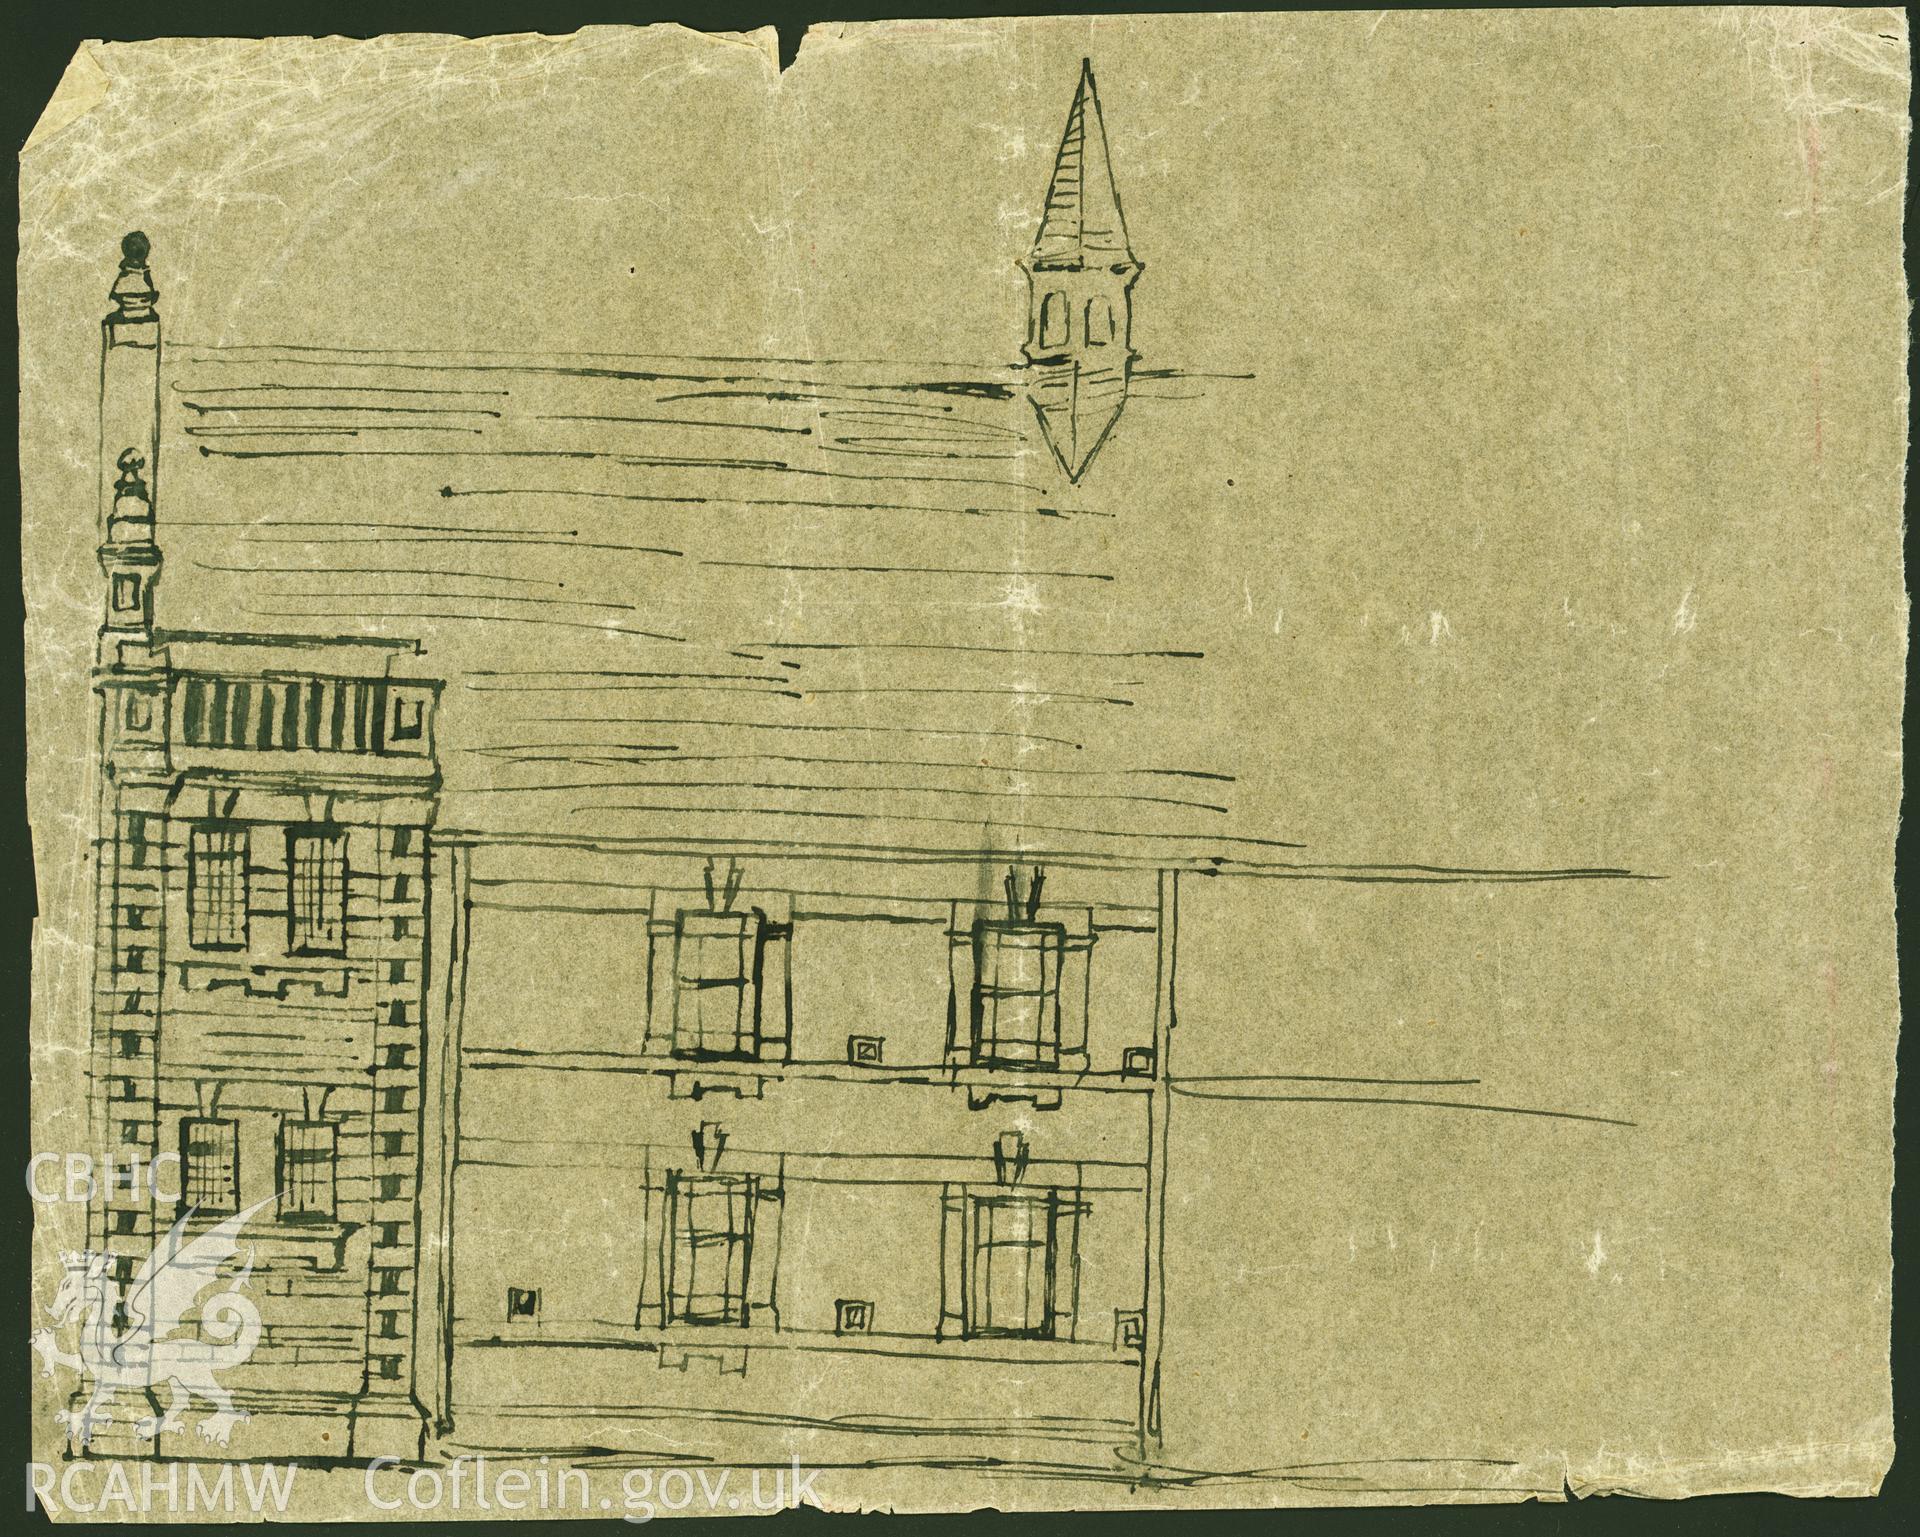 Digitized copy of a pen and ink drawing showing an side elevation view of Bethania Chapel, Maesteg. Part of a collection of material relating to Bethania Chapel, Maesteg, loaned for copying by the Welsh Religious Buildings Trust. The original collection is held by the Glamorgan Record Office.